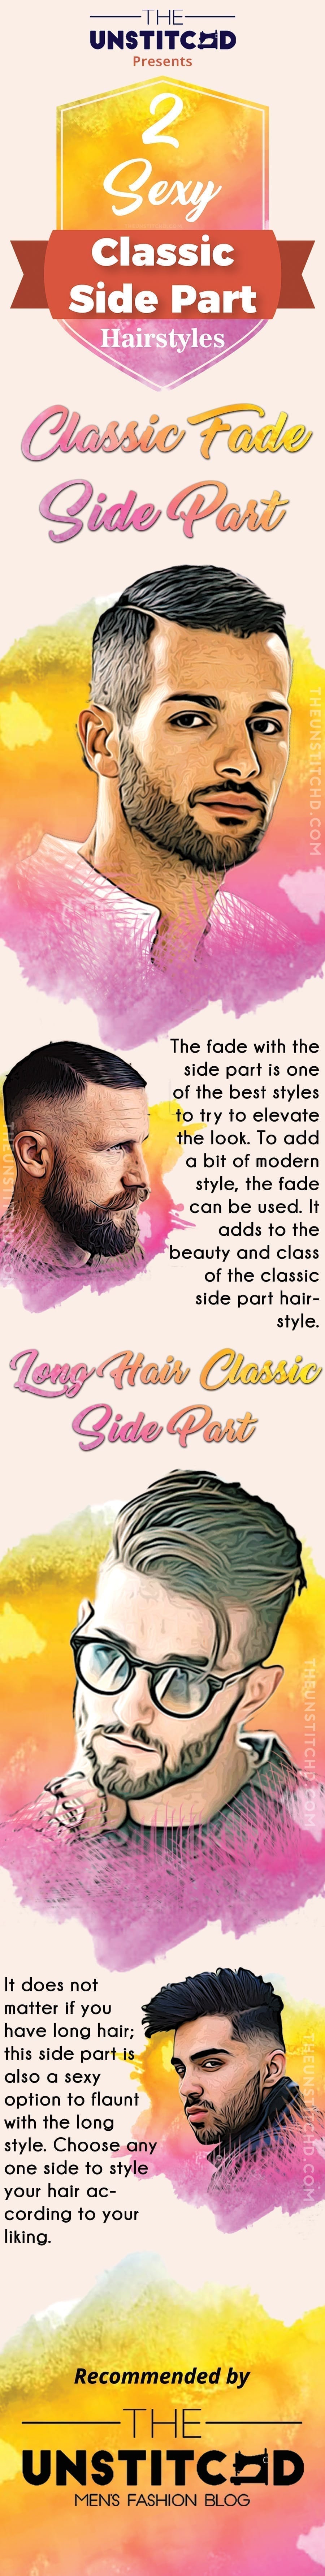 classic-side-part-hairstyle-info